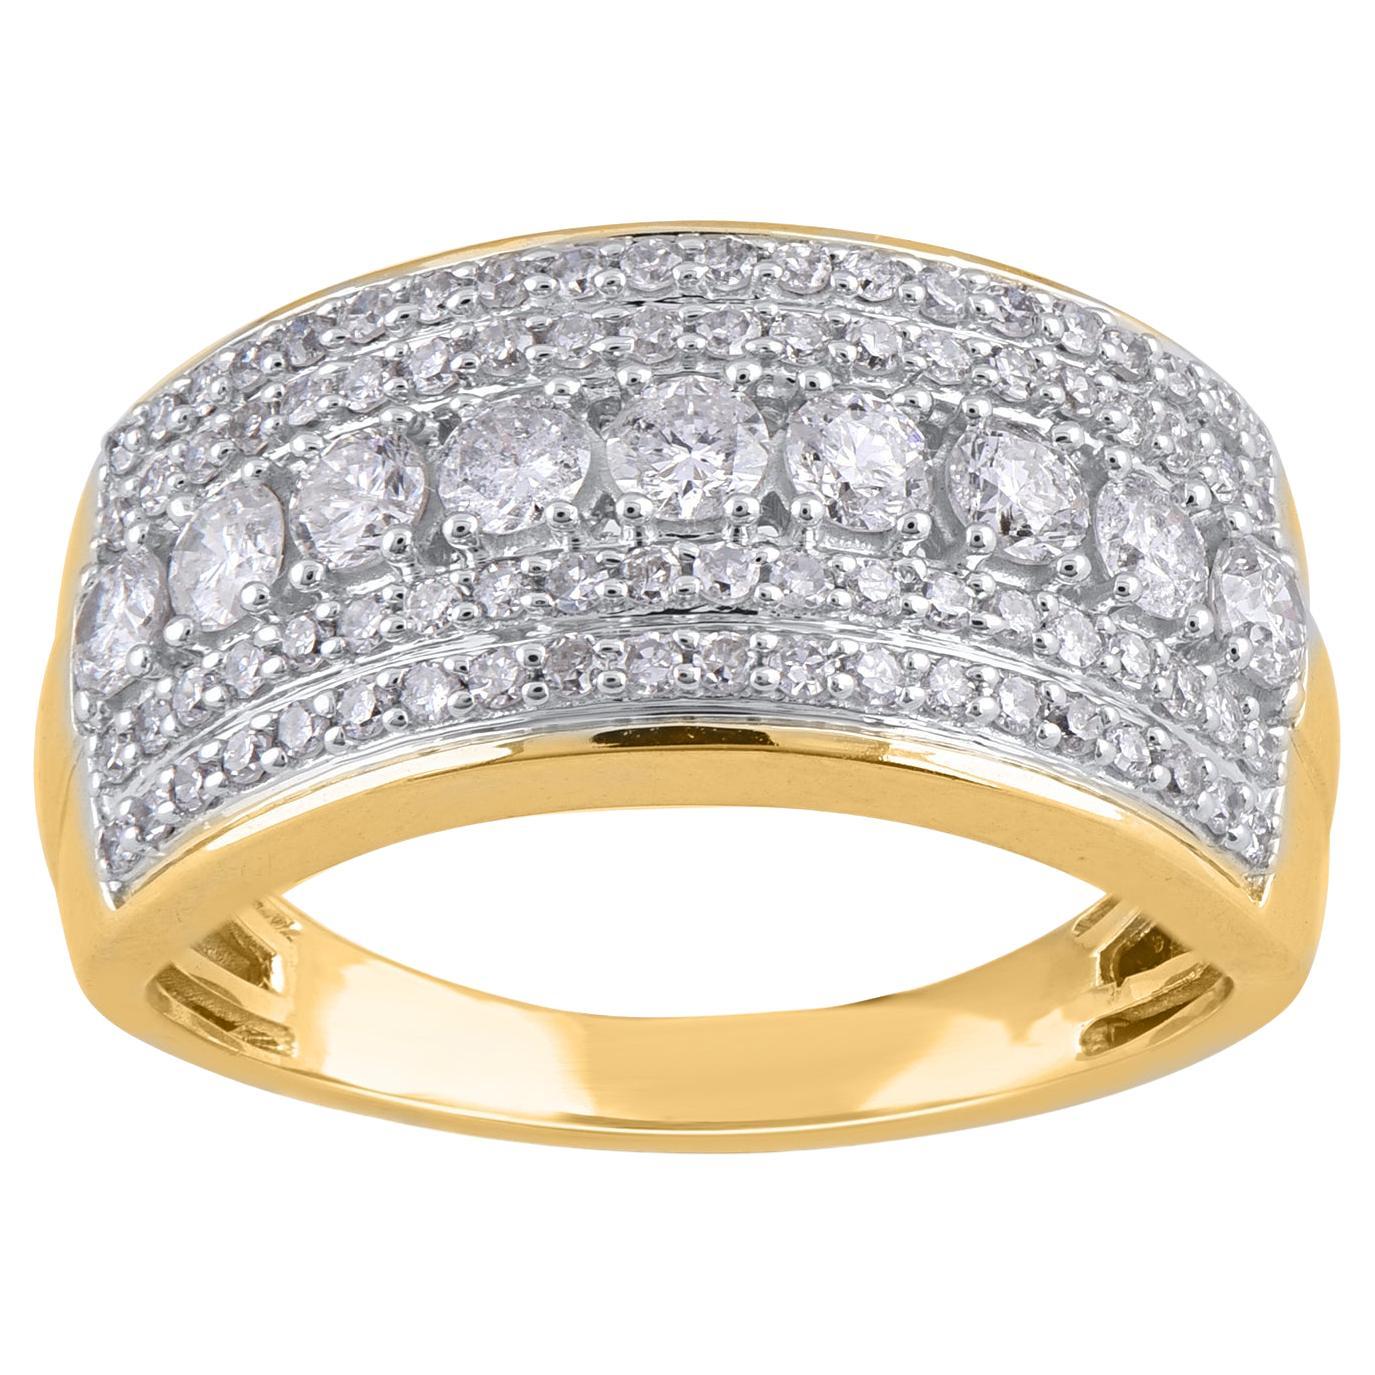 TJD 1.0 Carat Round Cut Diamond 14KT Yellow Gold Wedding Band Ring For Sale